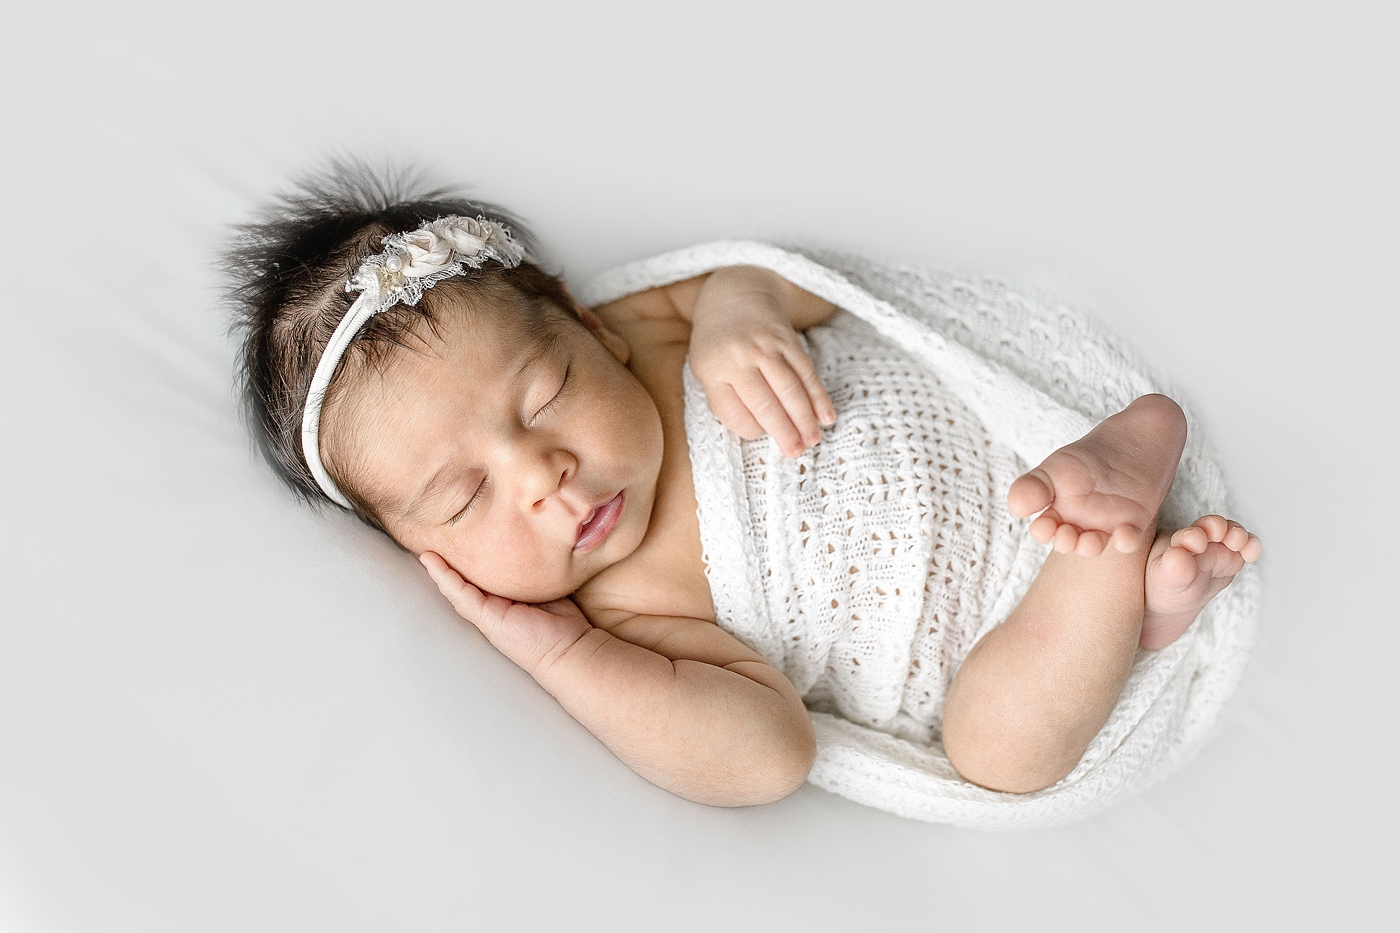 Baby wrapped in white lace swaddle during Newborn Photography Miami session. Photo by Ivanna Vidal Photography.